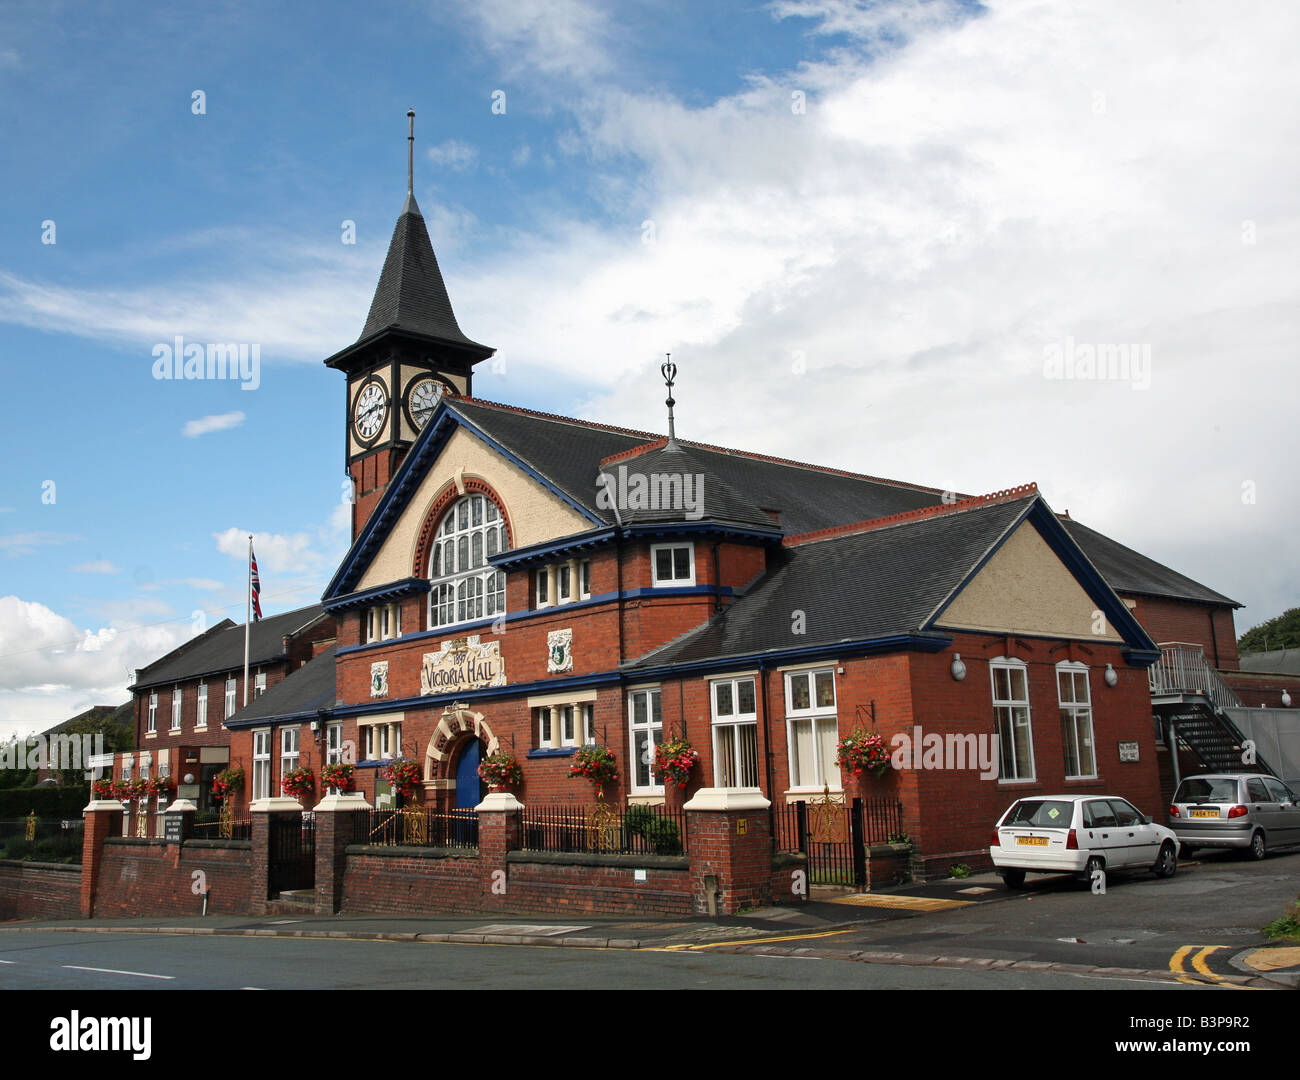 Town Hall or Victoria Hall, Kidsgrove, Stoke-on-Trent, Staffordshire, West Midlands, England Stock Photo